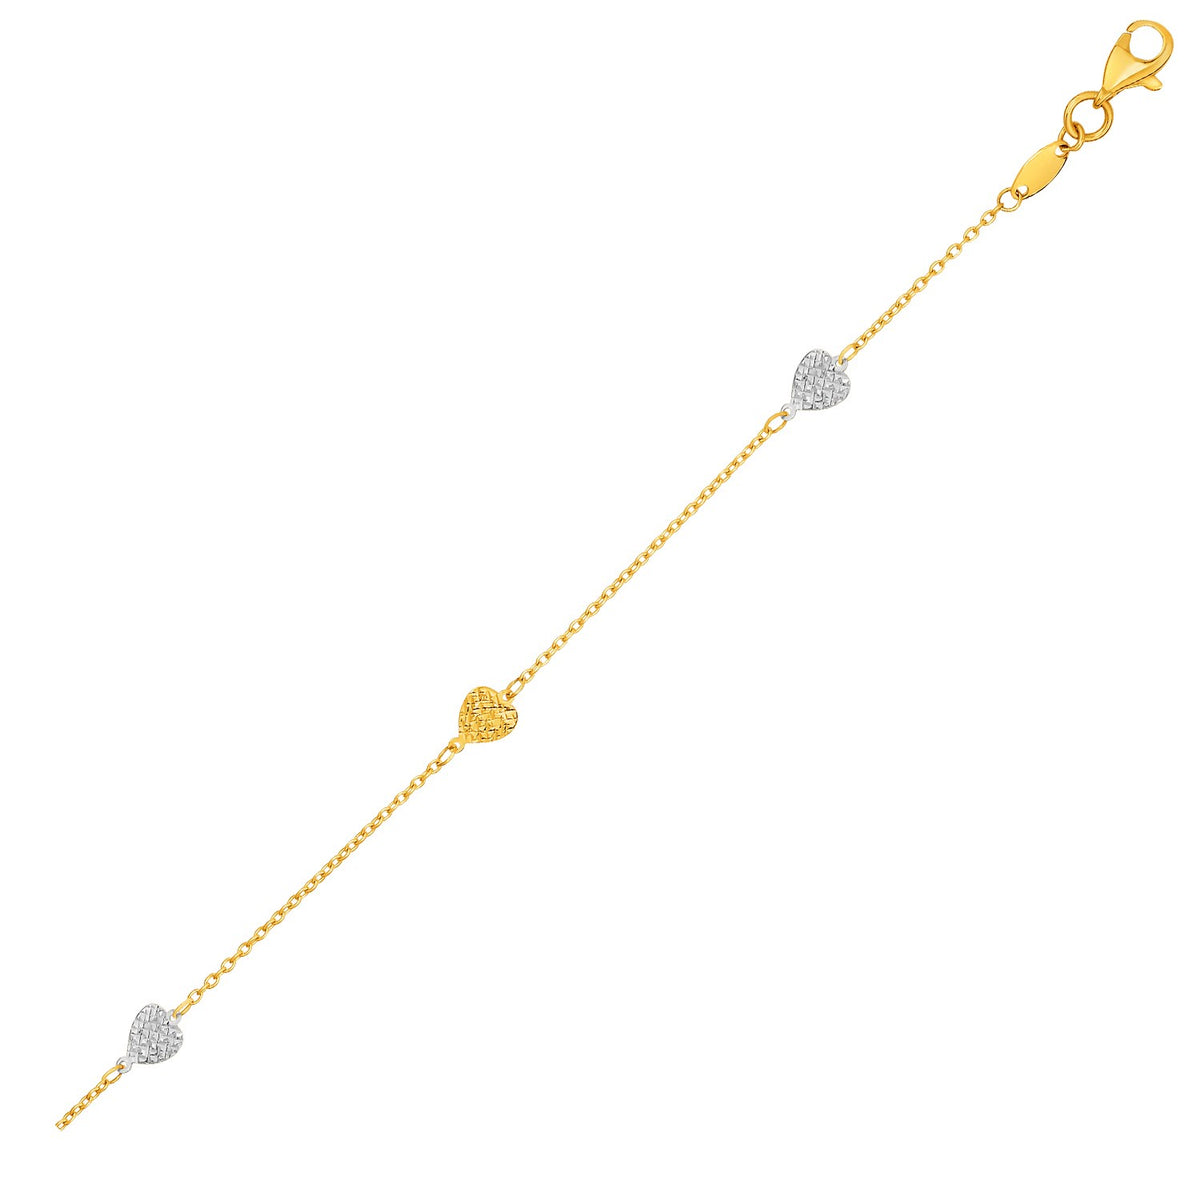 Textured Hearts Anklet - 14k White & Yellow Gold